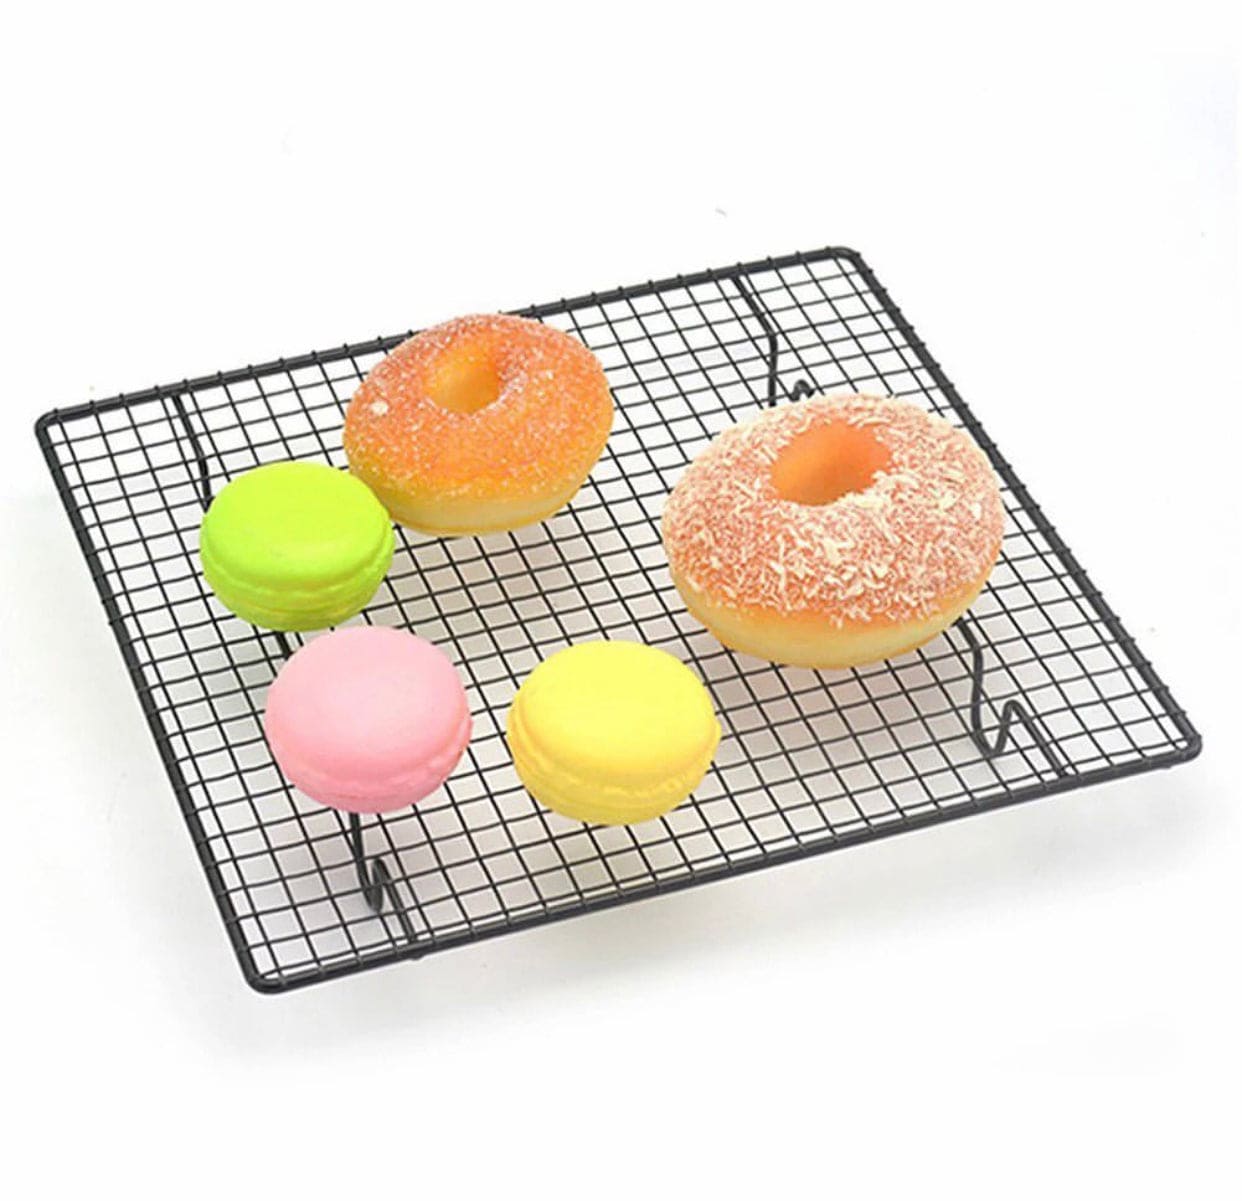 Nonstick Stainless Steel Cooling Rack, Dessert Pastry Cooling Stand, Cake Bread Cookie Pie Cooling Grid Tool, Kitchen Baking Tool